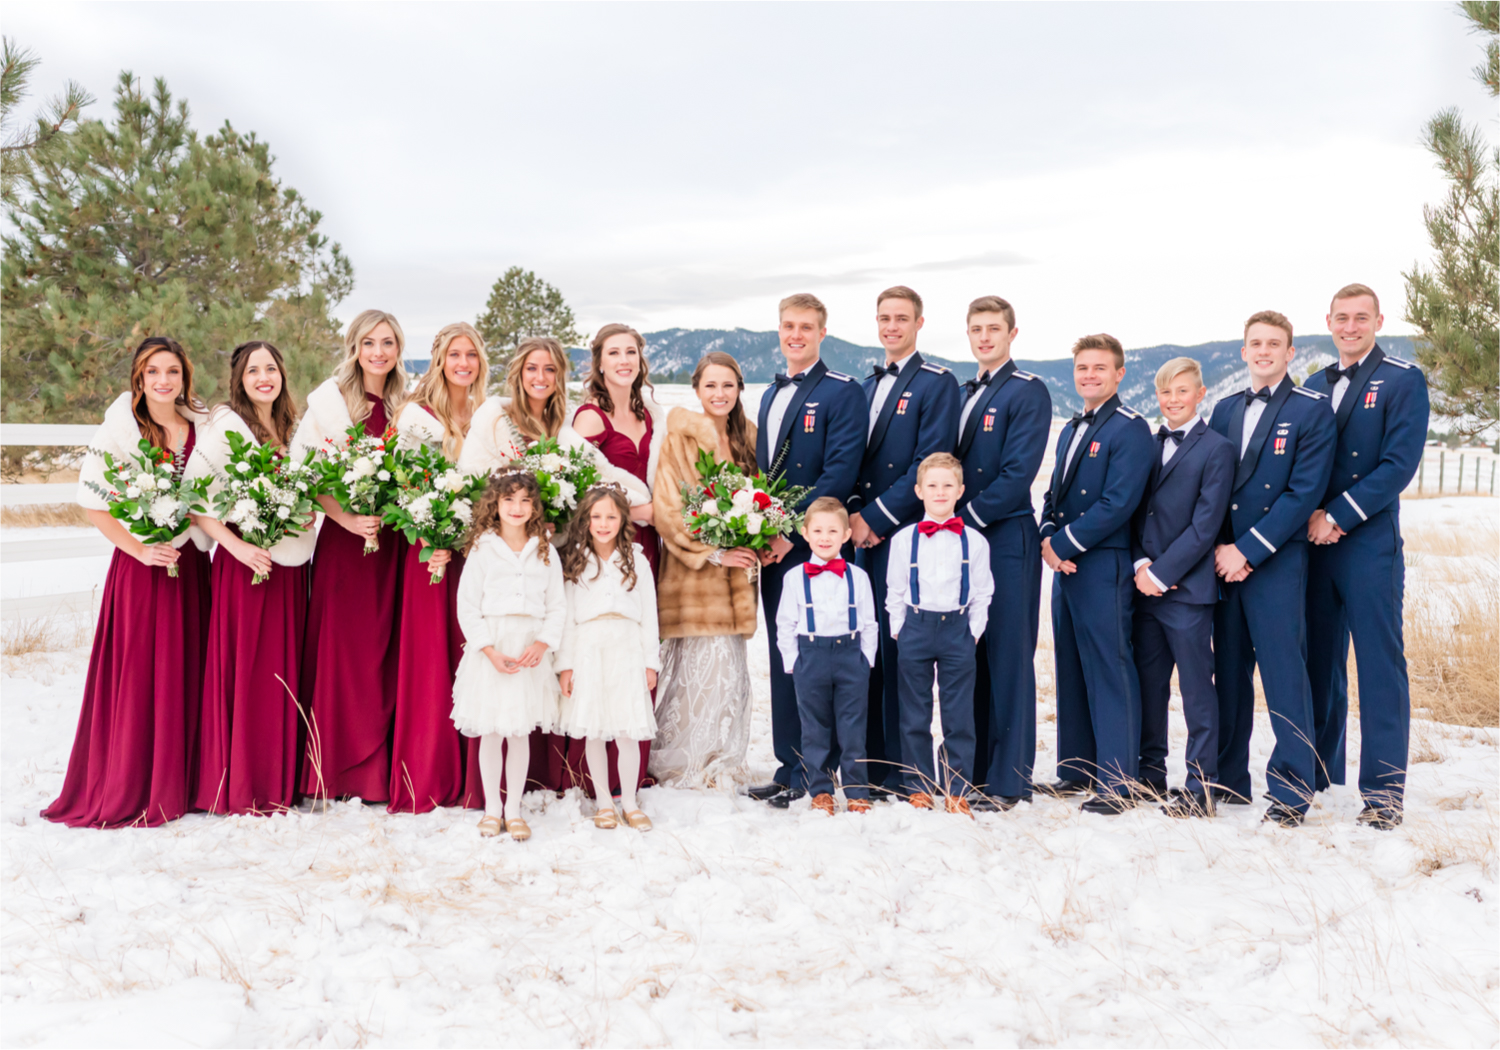 Winter Wonderland Wedding in Colorado Springs | Britni Girard Photography Colorado Wedding Photography and Film Team | Snow covered mountains and Christmas just a few days away | Annika + John's Nostalgic Winter Wedding | Bride's Dress iDream Bridal Essence of Australia | Air Force Academy | Snowy Wedding Party Portraits with Fur minks for bridesmaids in Azazie dresses